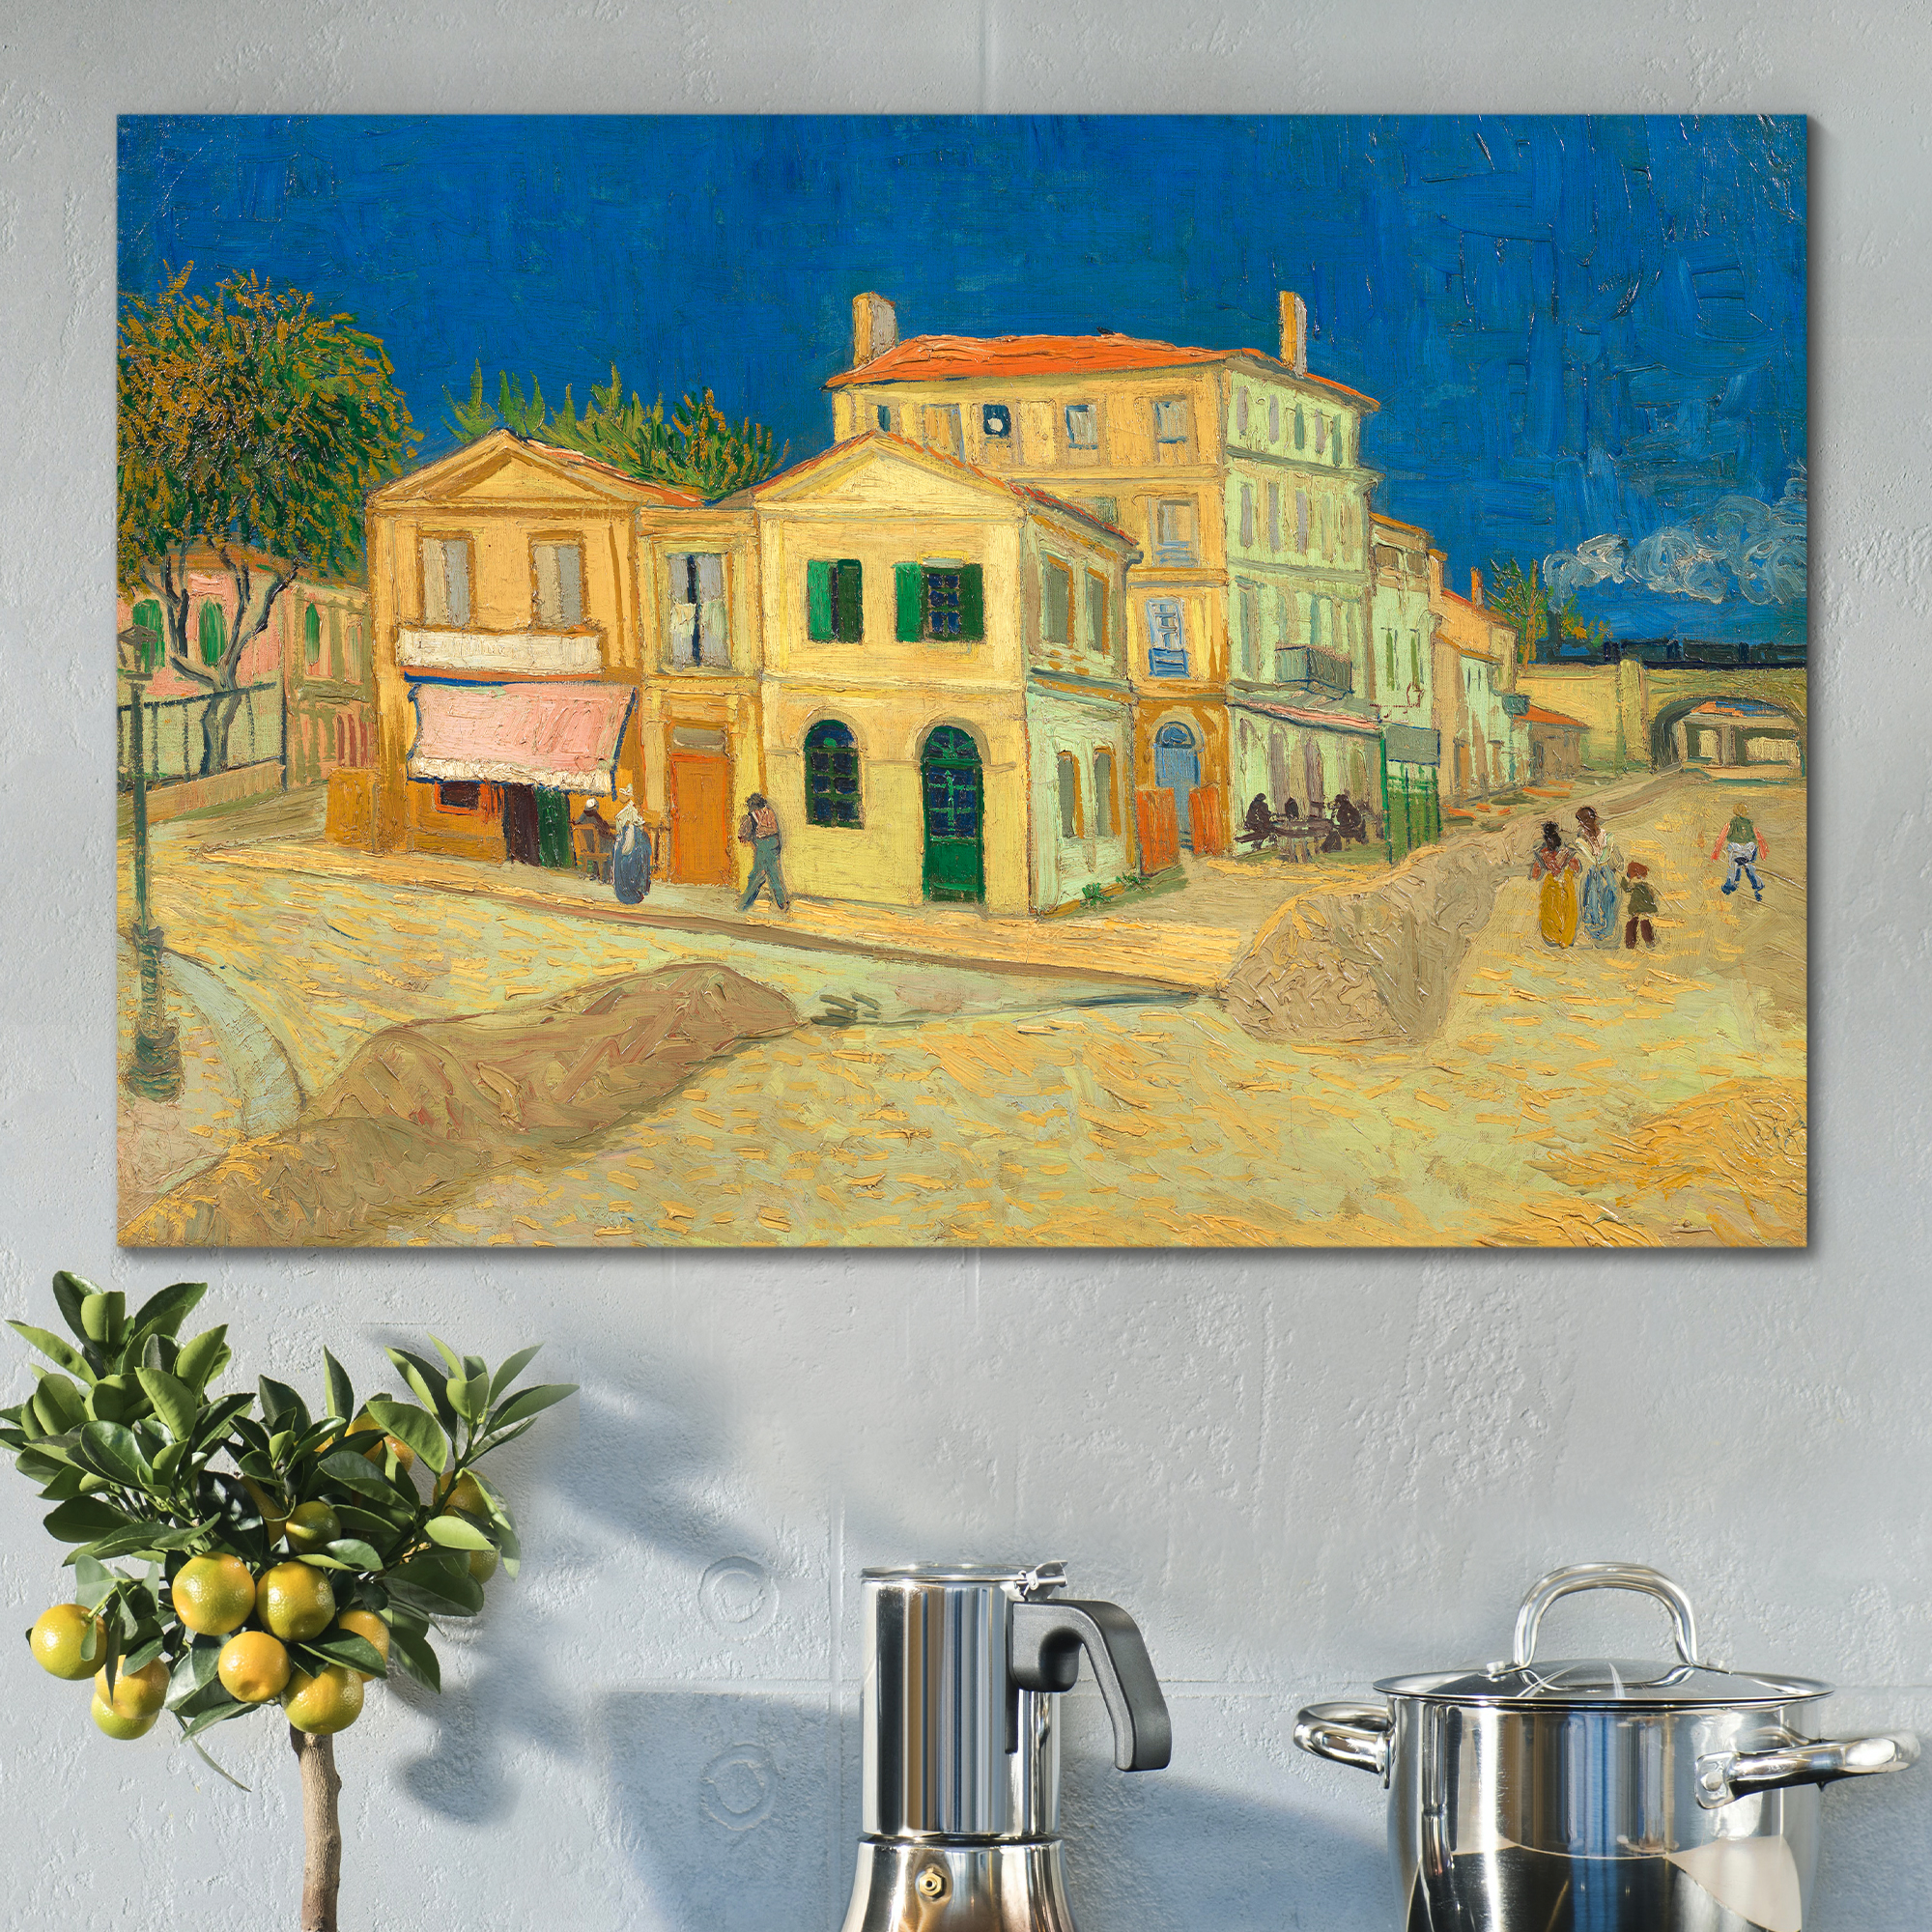 The Yellow House by Vincent Van Gogh - Oil Painting Reproduction on Canvas Prints Wall Art, Ready to Hang - 32